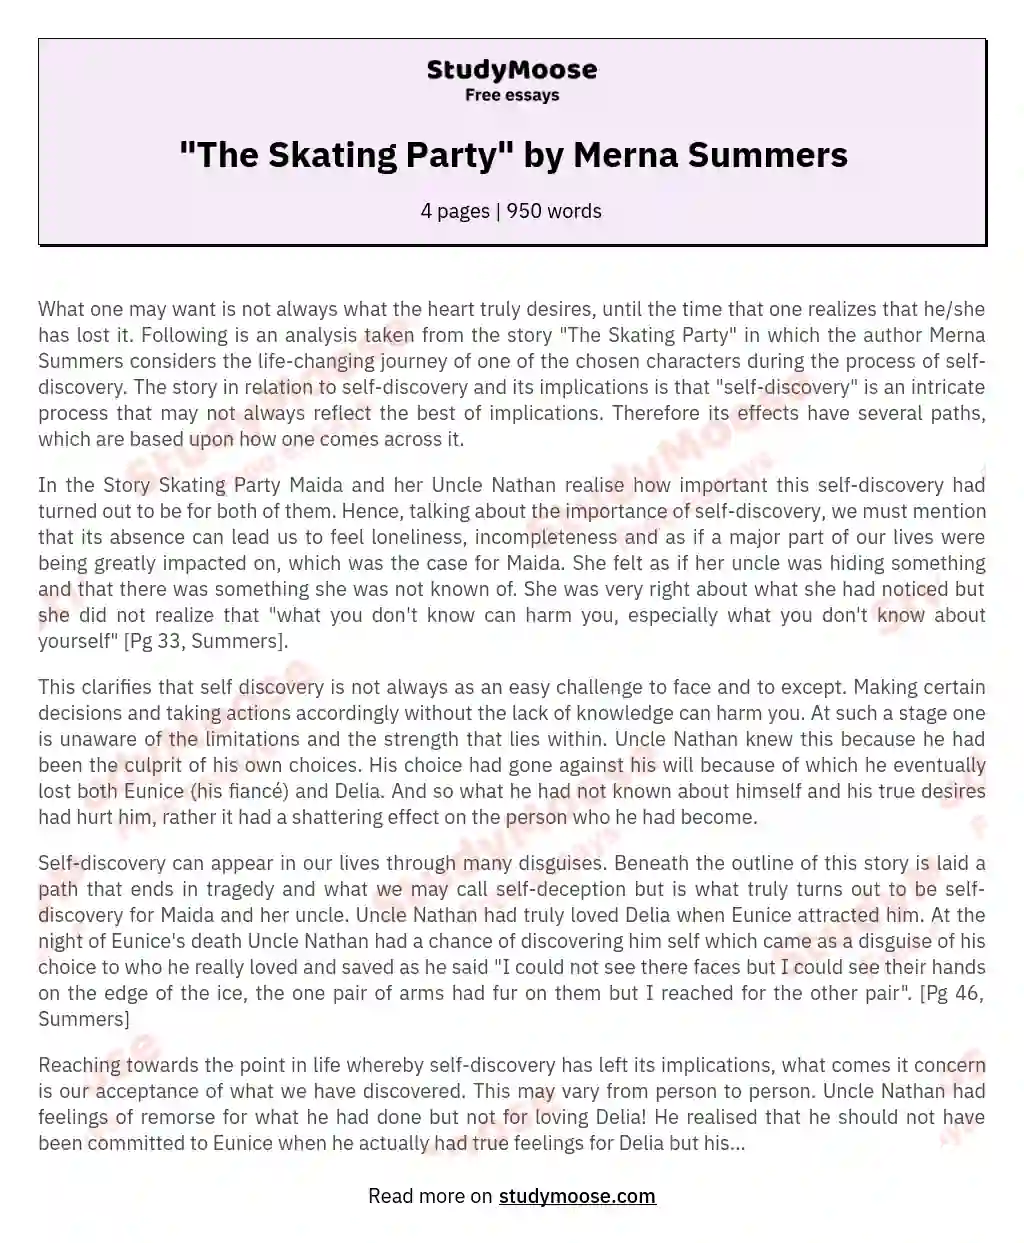 "The Skating Party" by Merna Summers essay